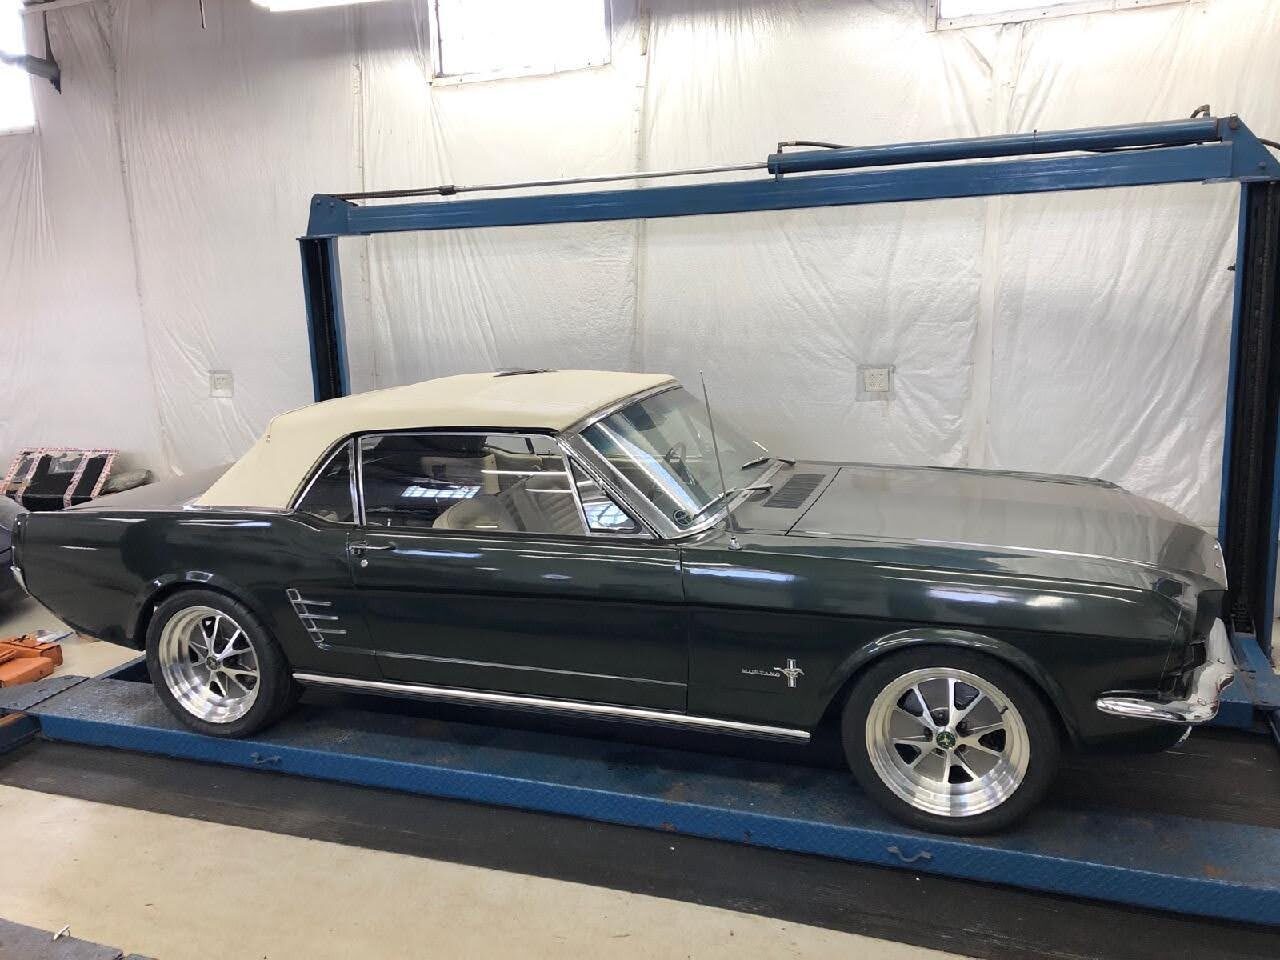 1966 Mustang Convertible Restored and Modified